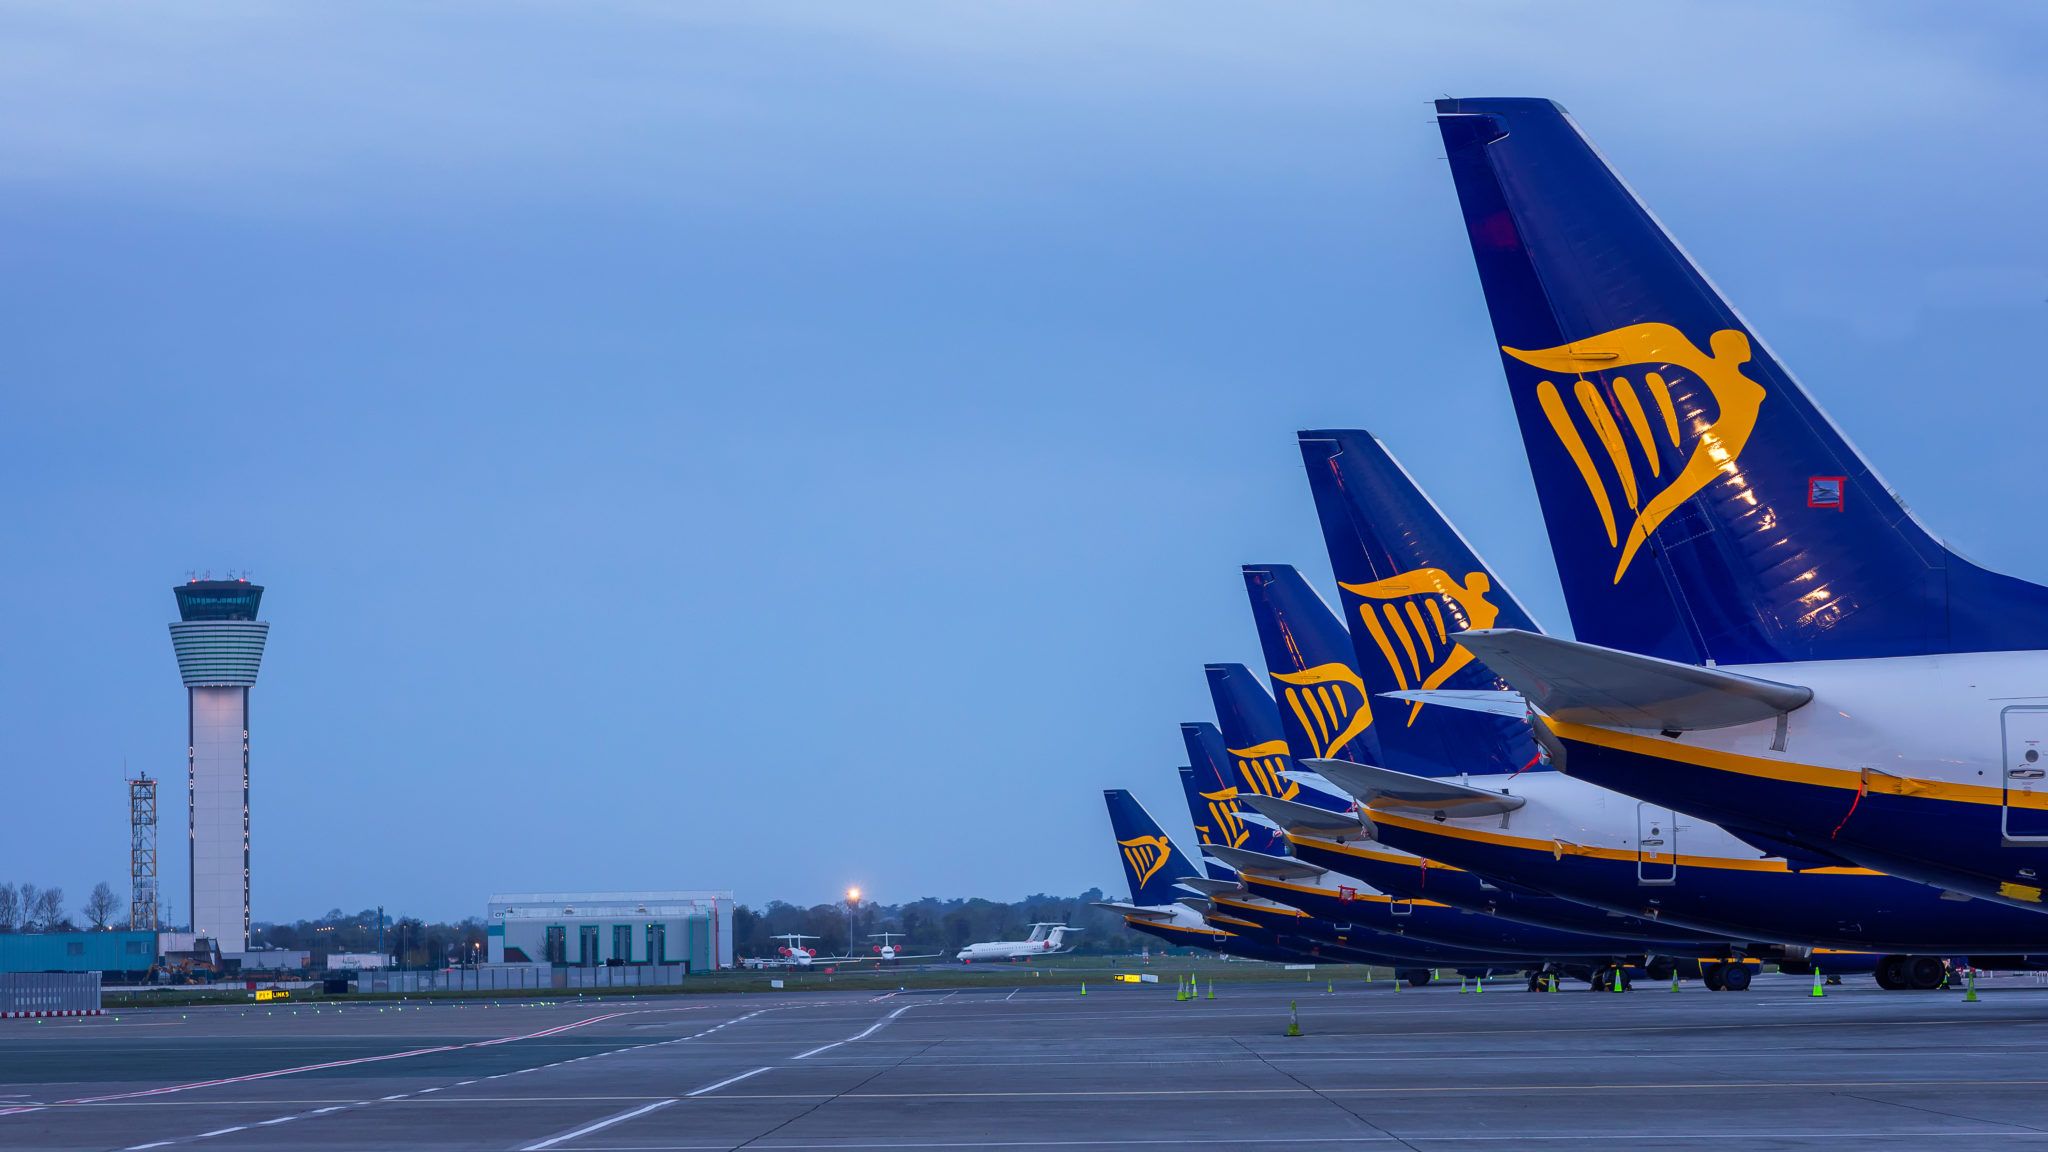 several ryanair planes parked beside each other in airport